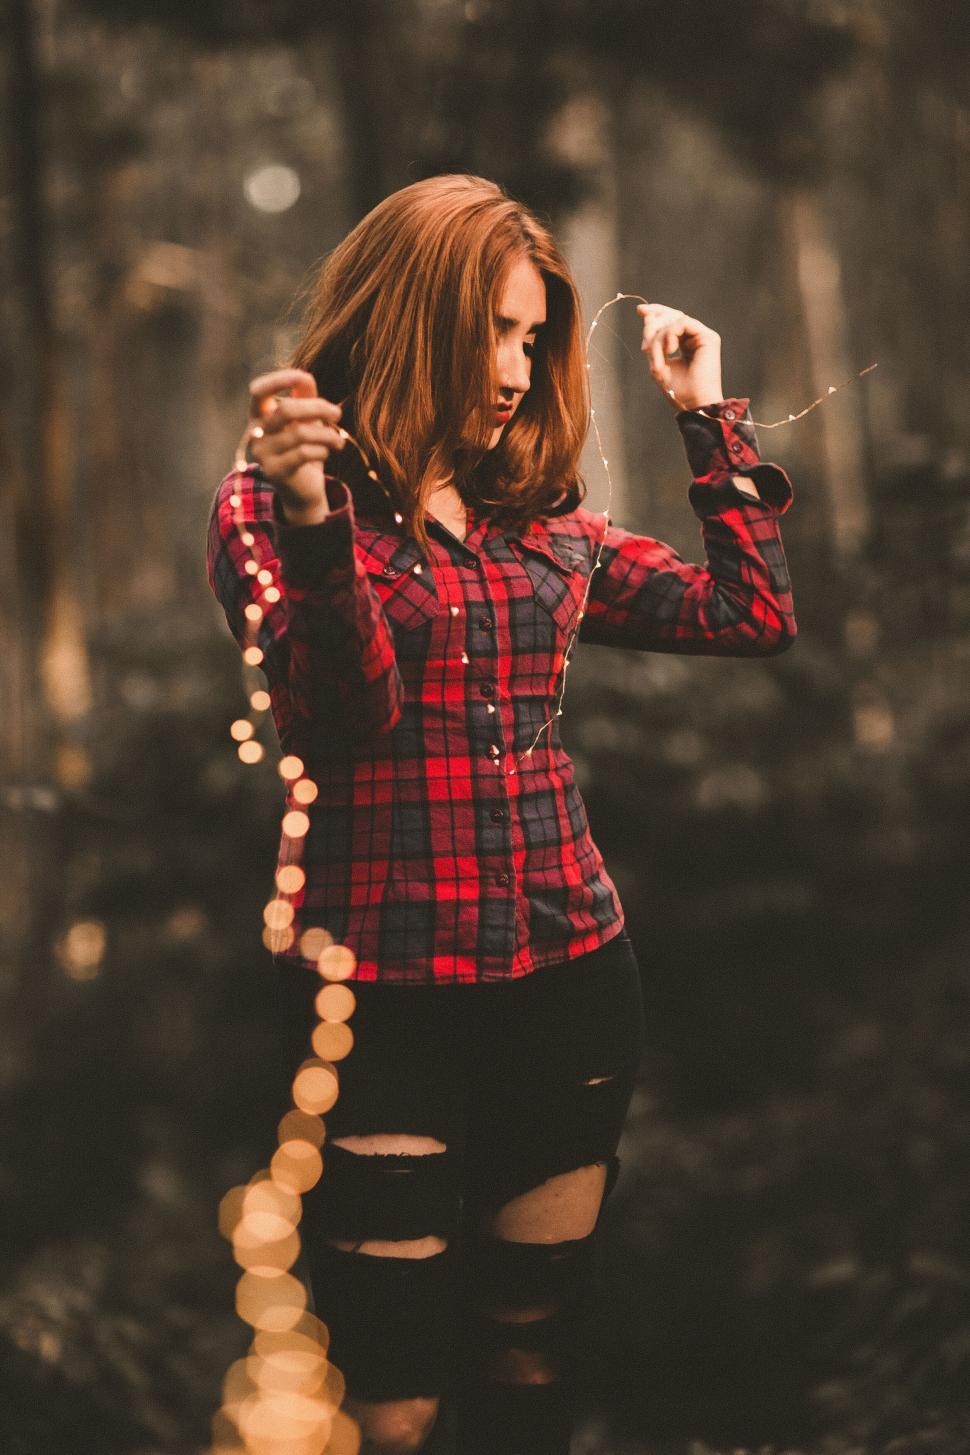 Free Image of A woman holding a string of lights 